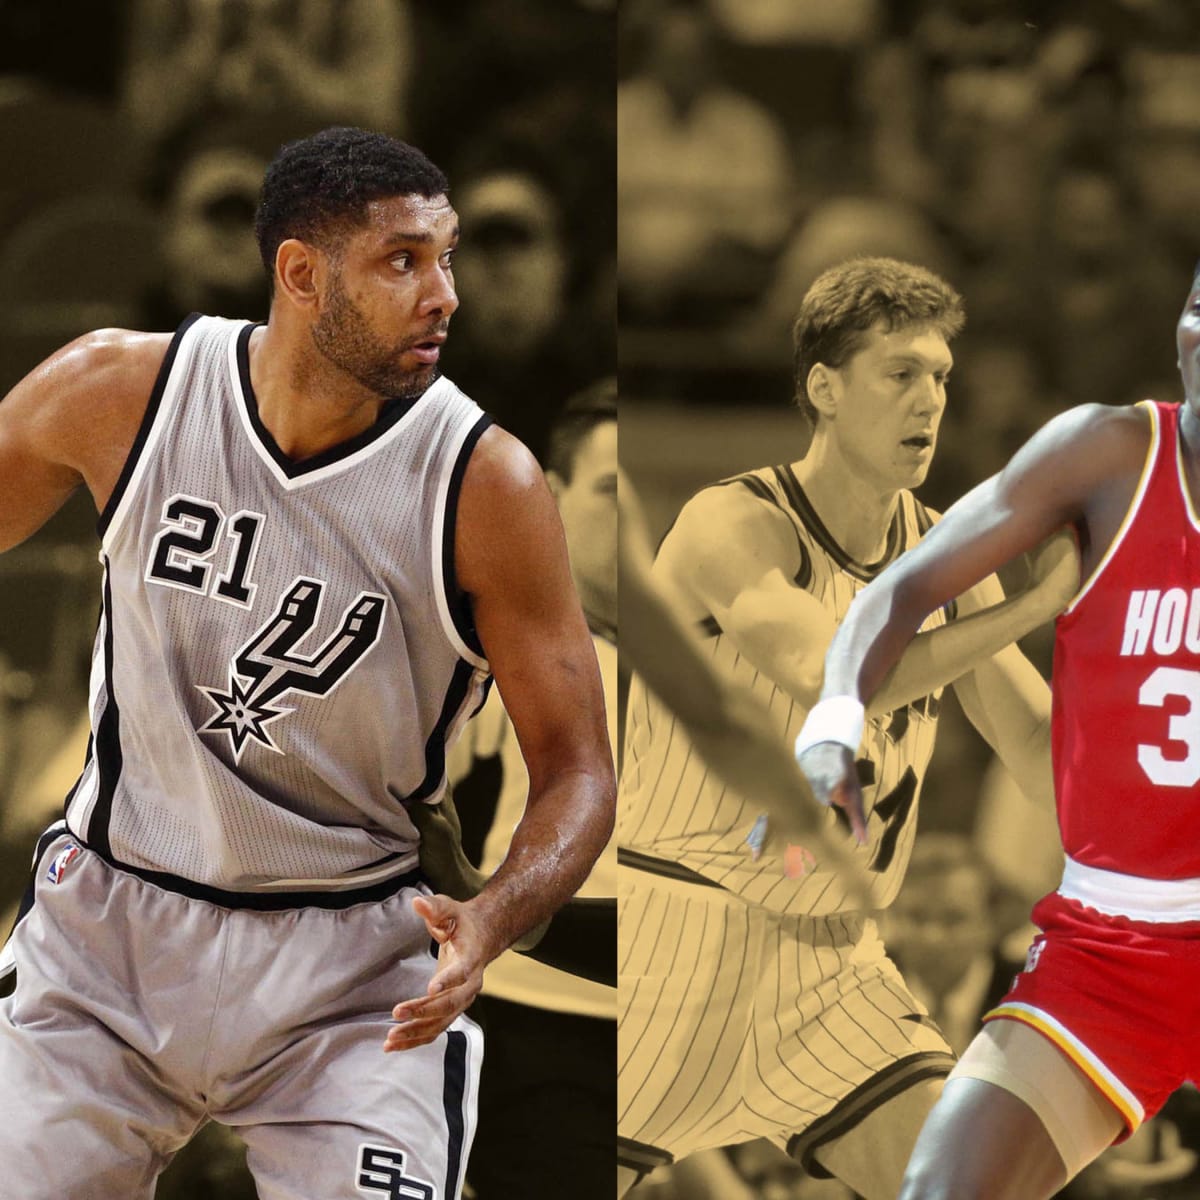 Robert Horry names three Houston Rockets players who helped him become an  all-around player - Basketball Network - Your daily dose of basketball